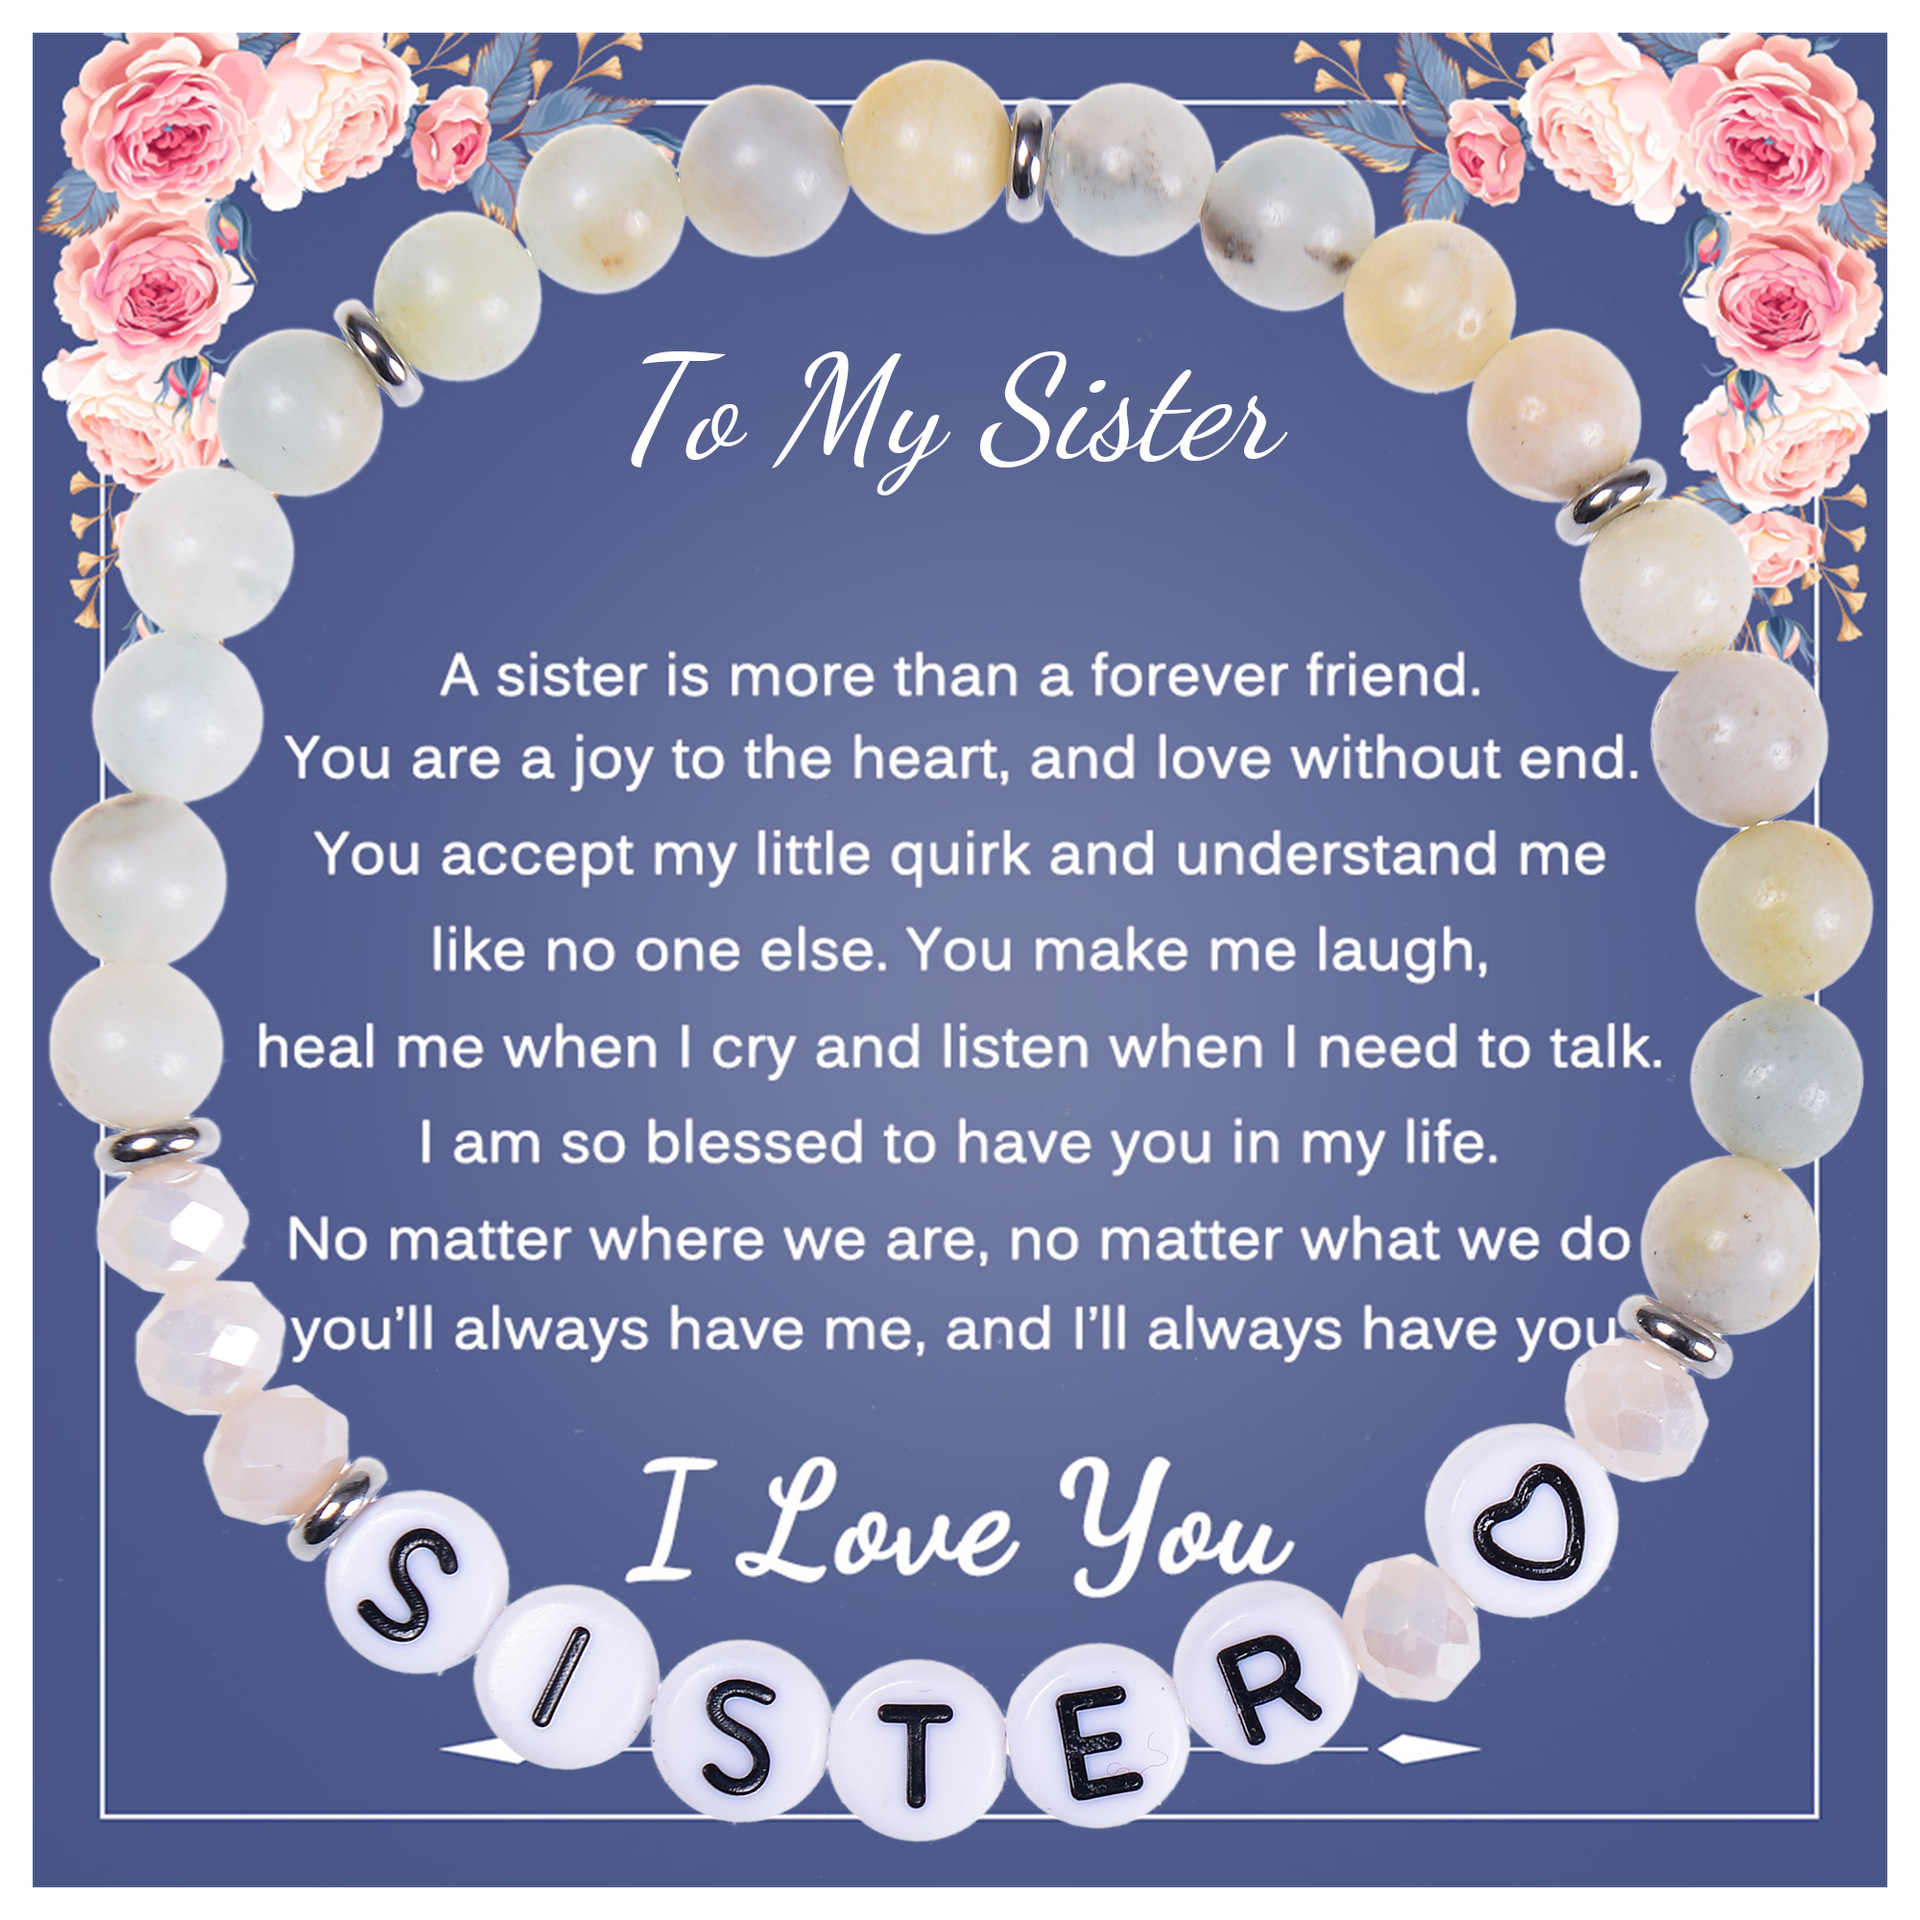 3:To My Sister